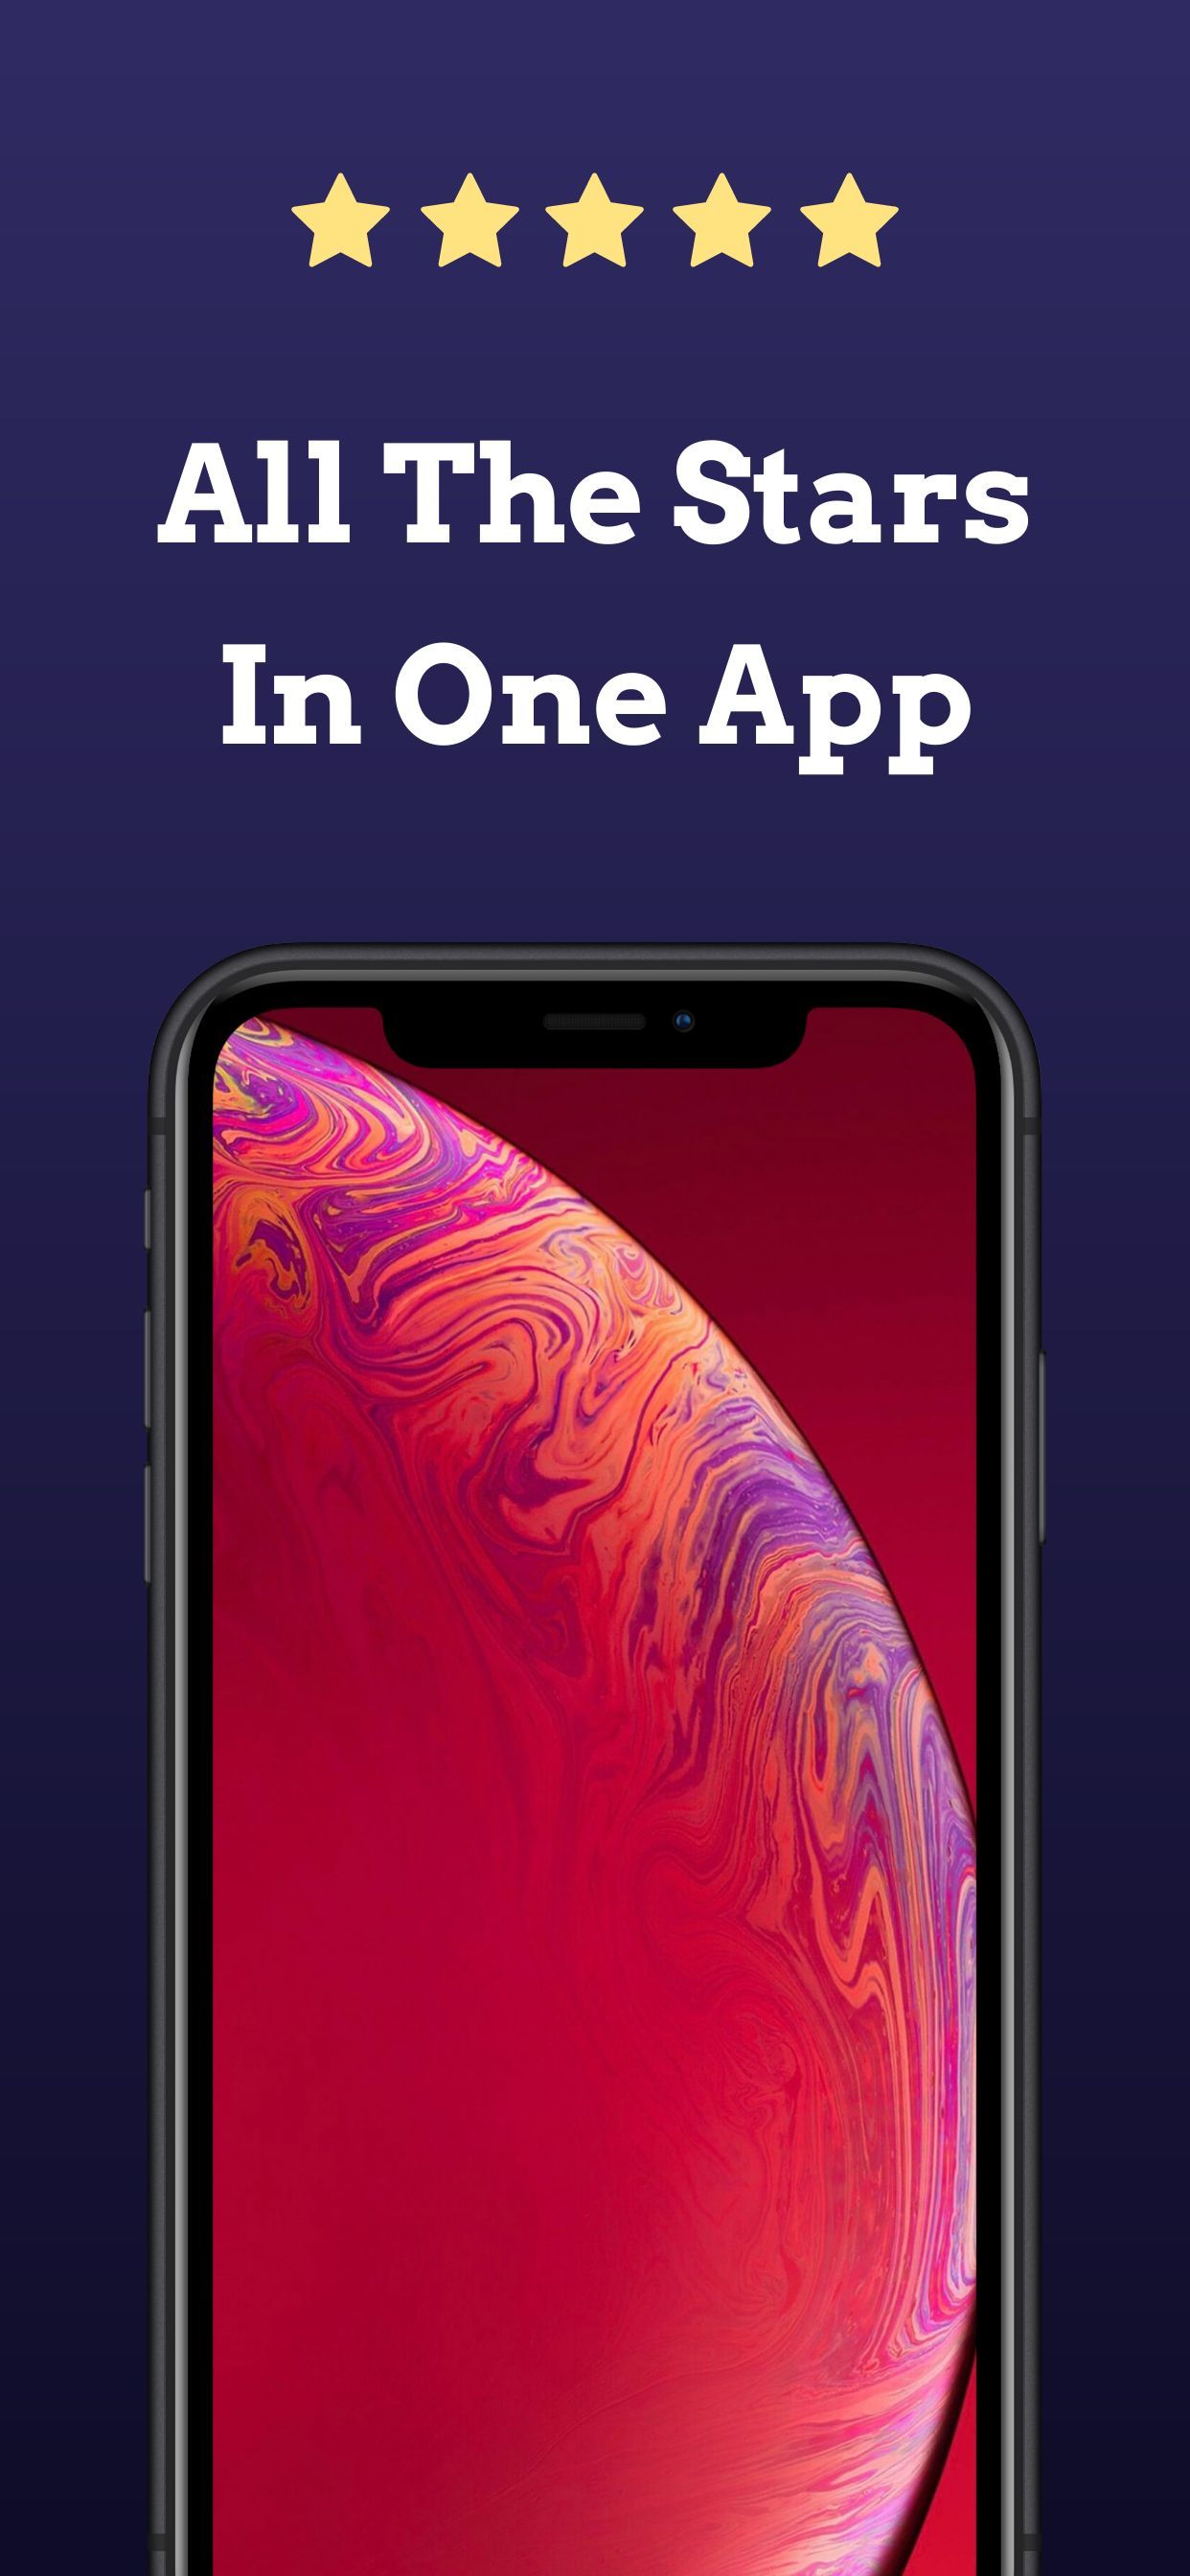 iPhone XS Max Screenshot 32 template. Quickly edit text, colors, images, and more for free.